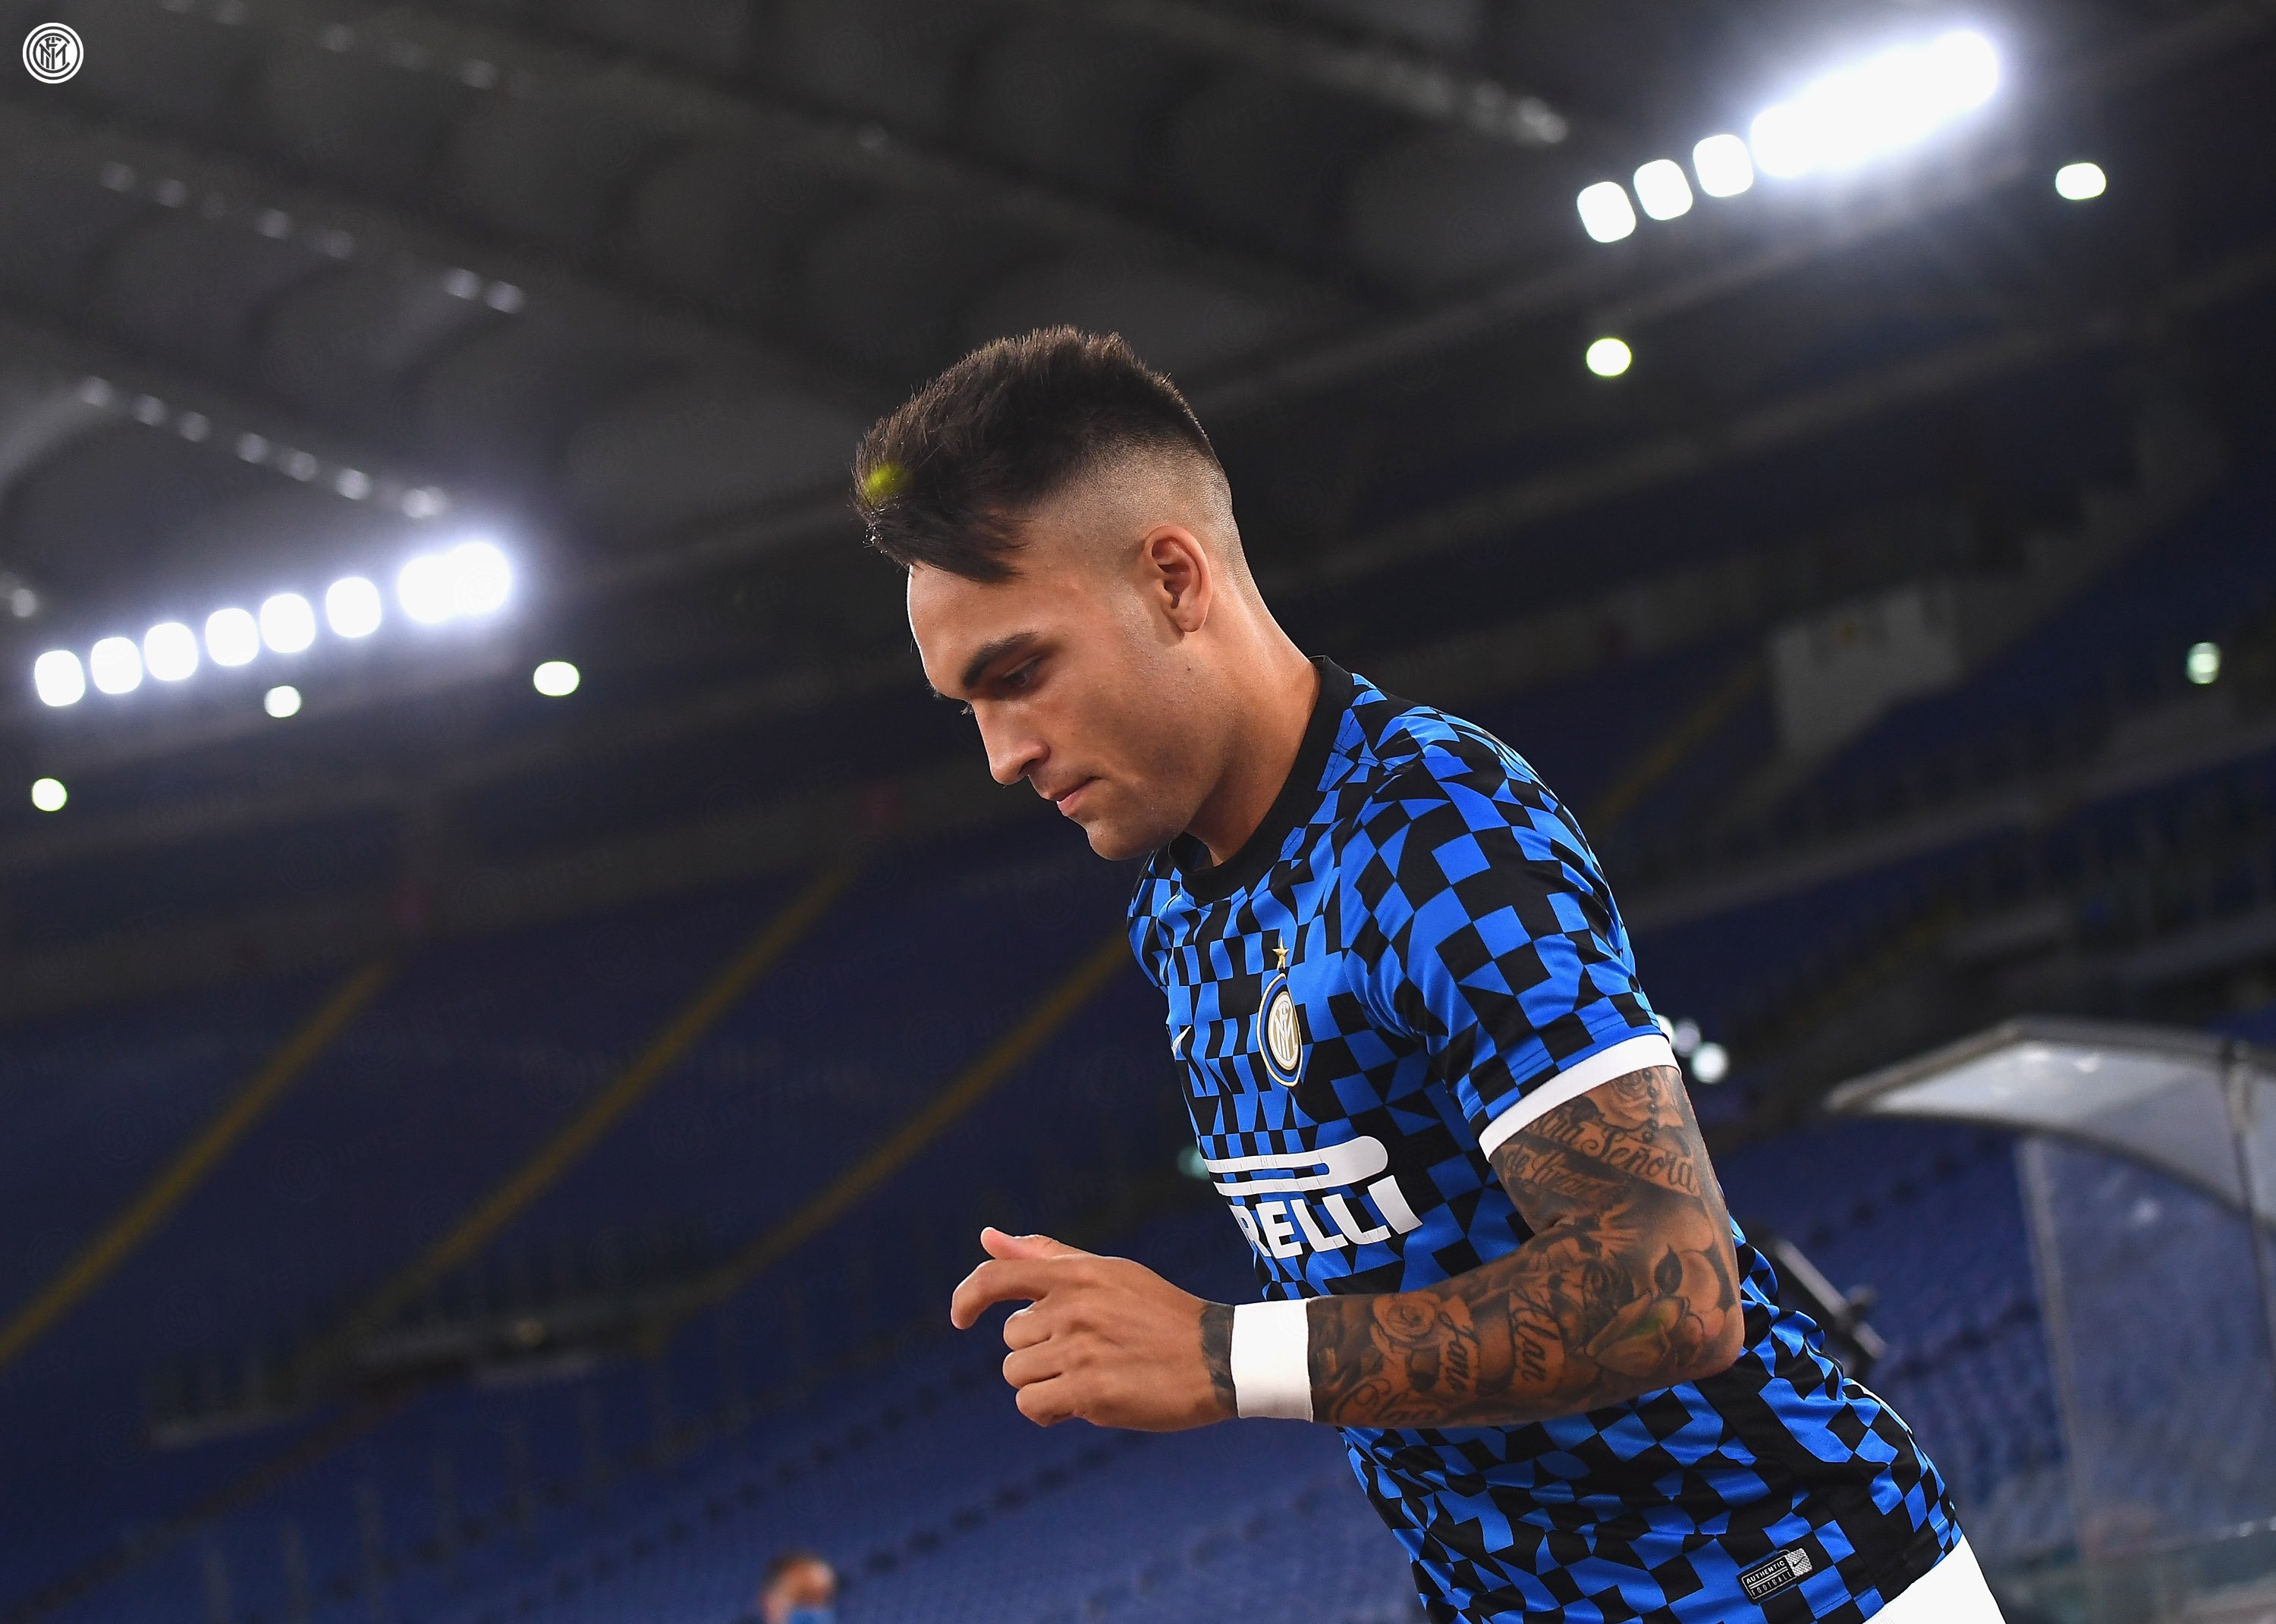 Reports | Inter Milan looking to offload Lautaro Martinez and sign three forwards next summer